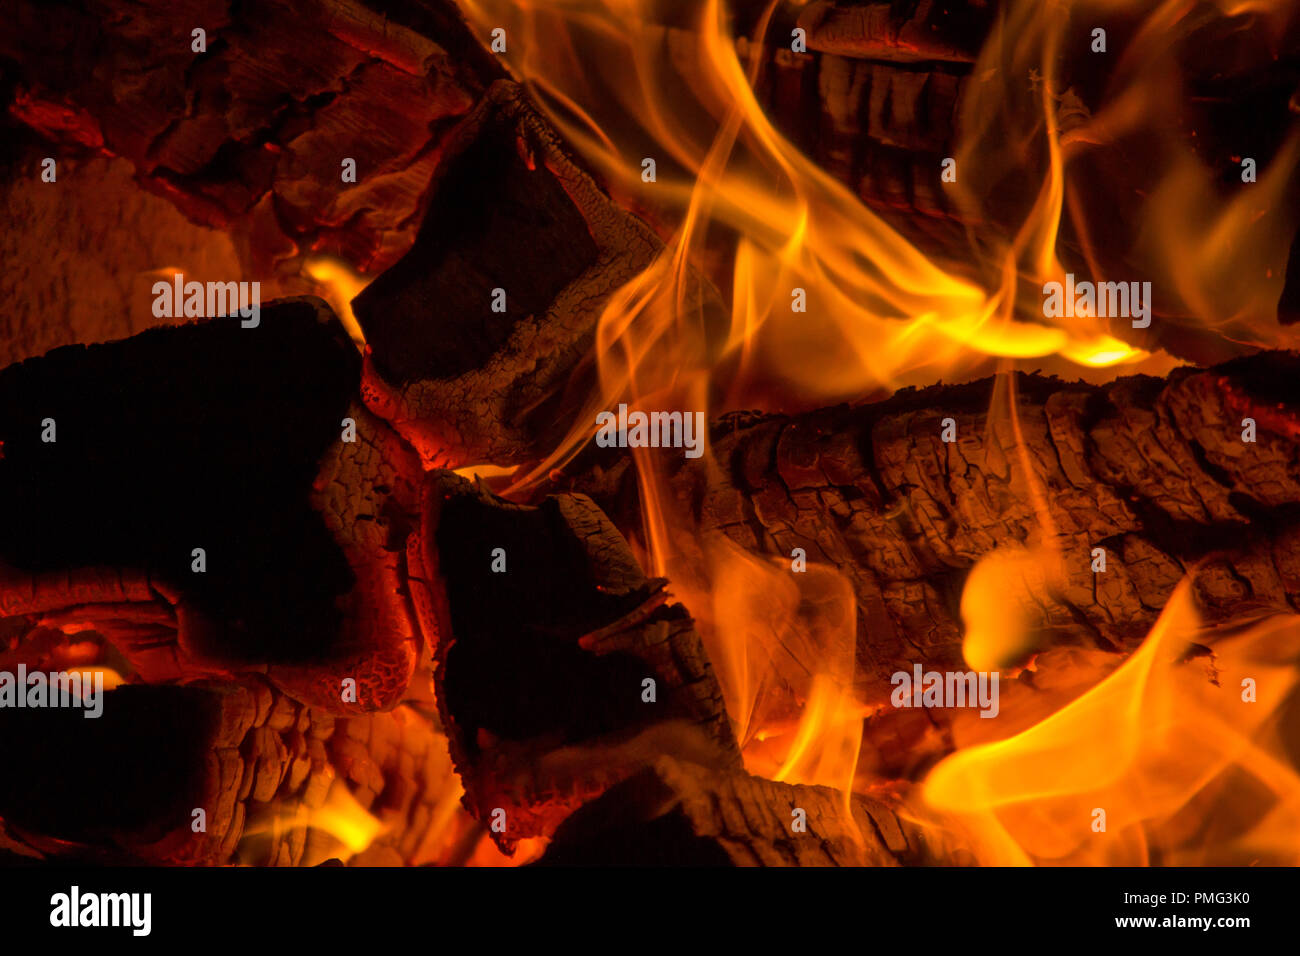 Burning firewood and charcoal in the fireplace Stock Photo